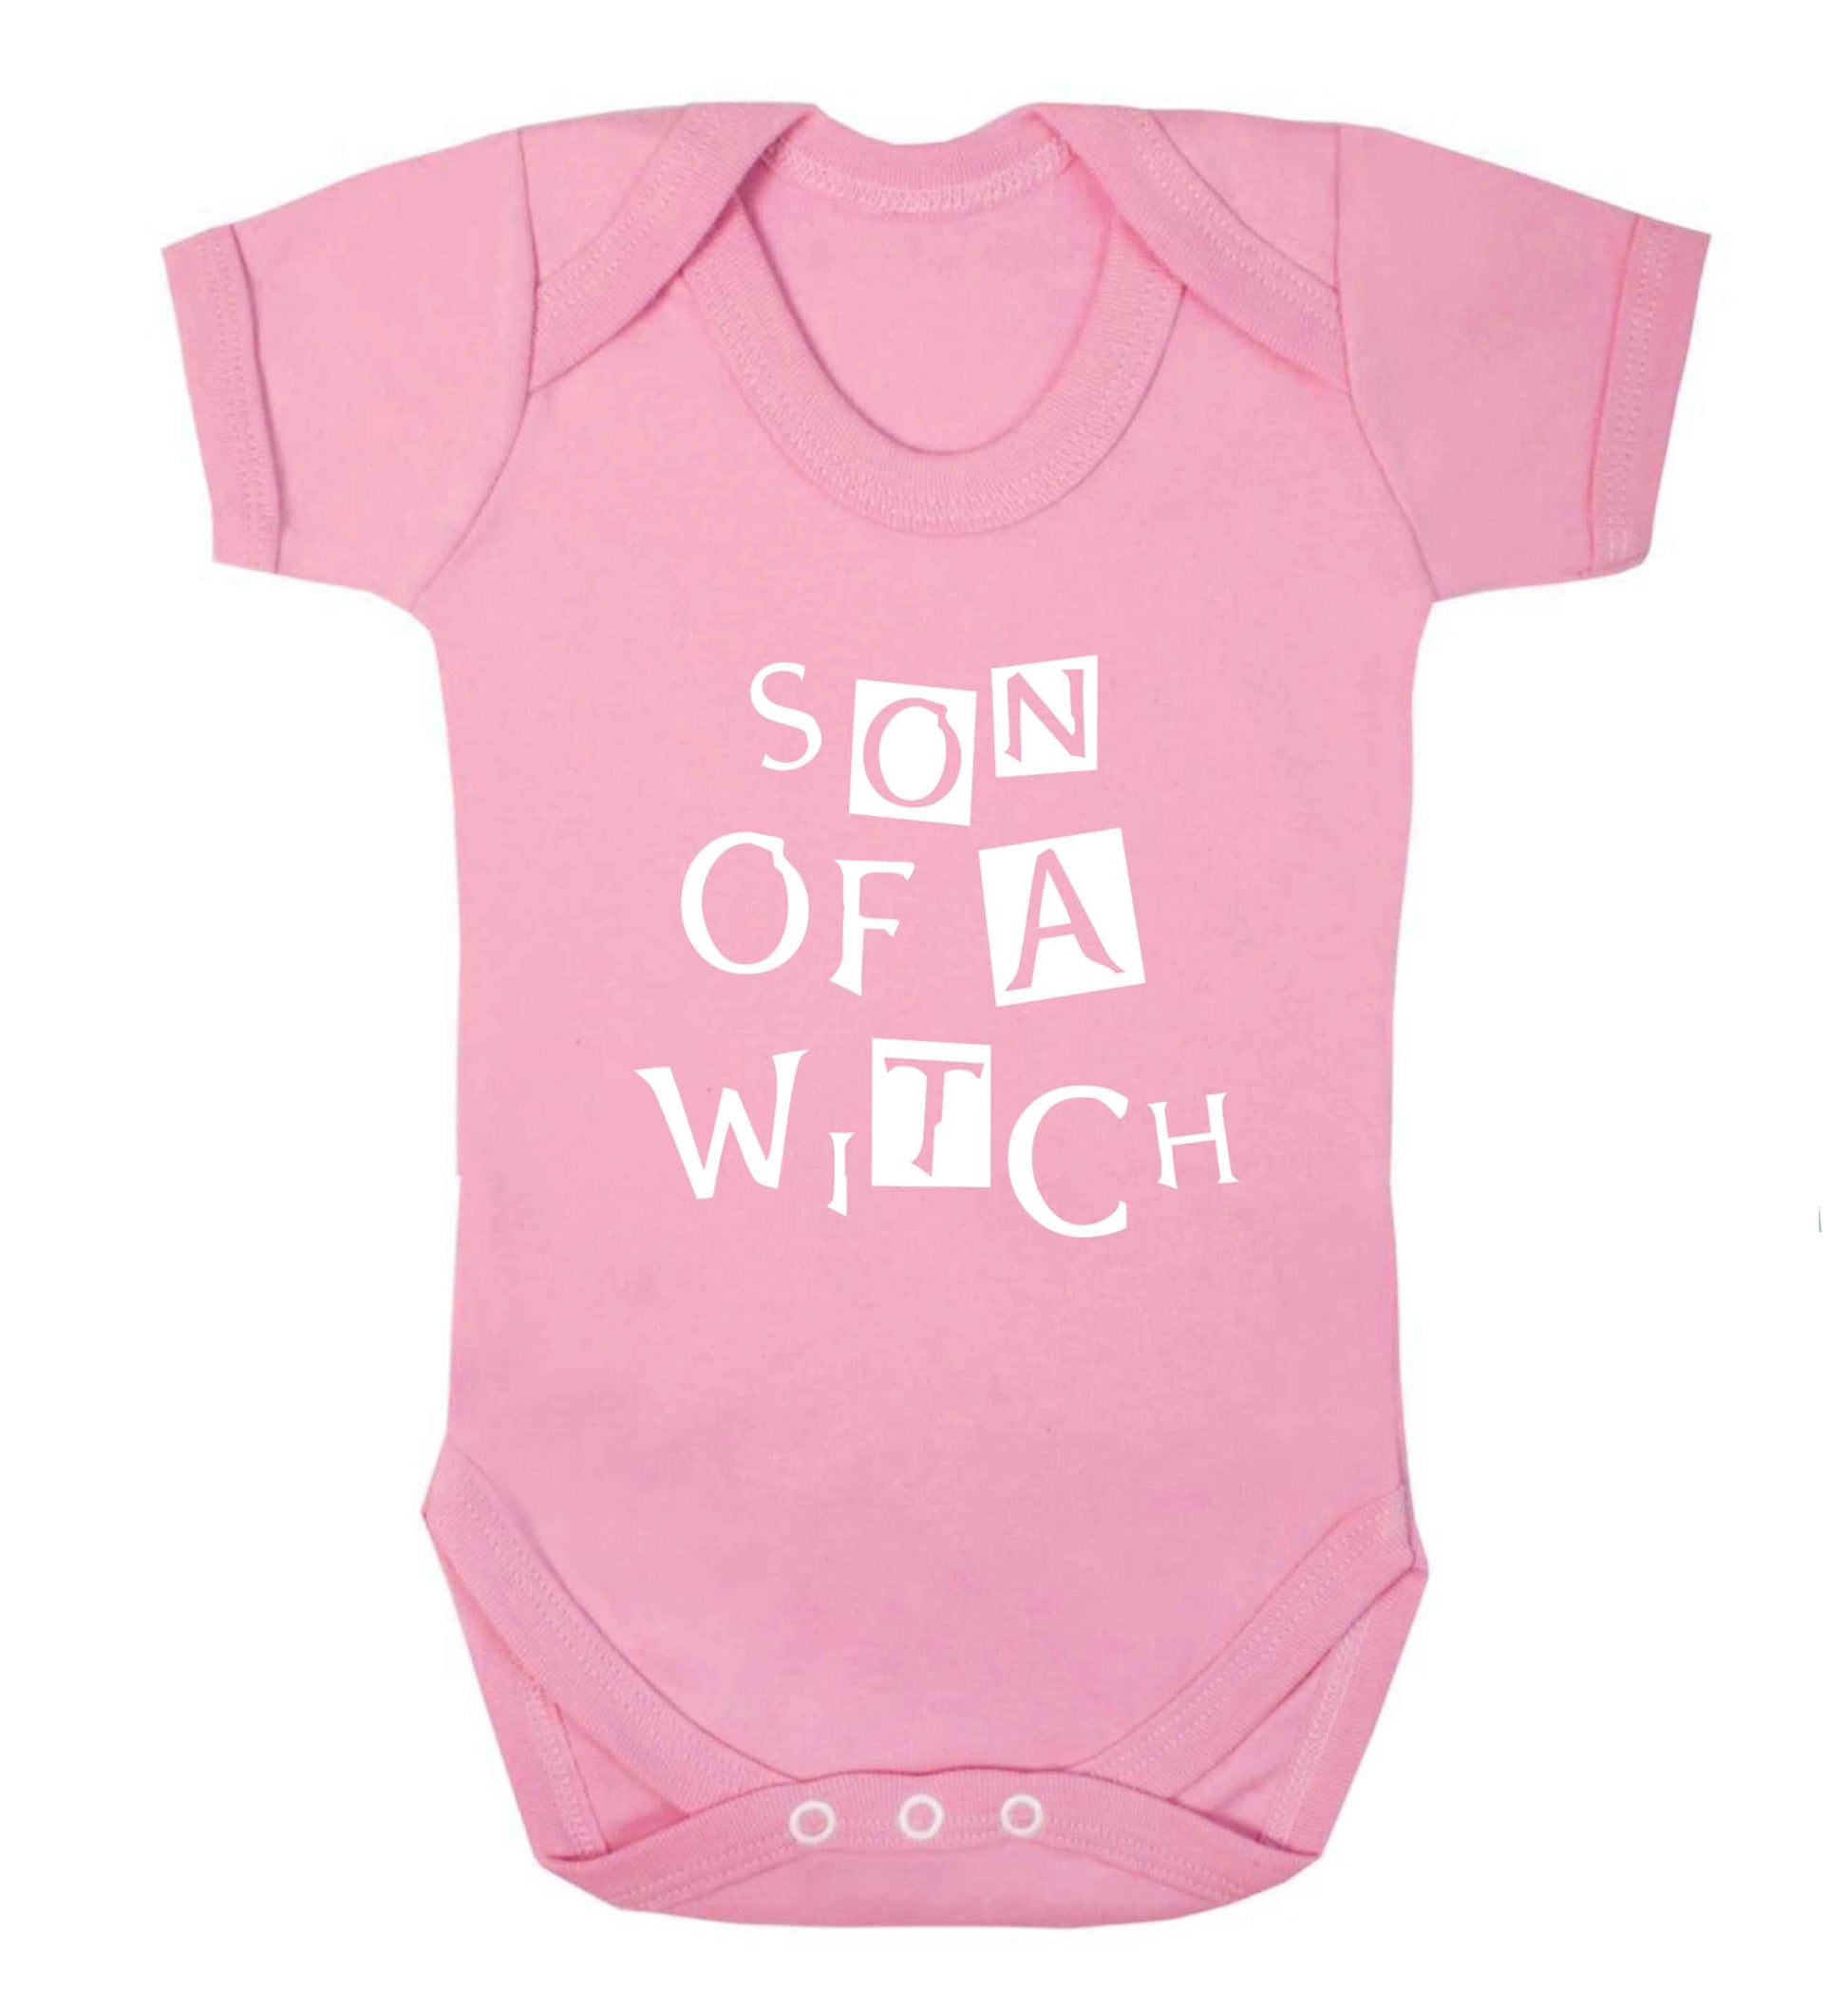 Son of a witch baby vest pale pink 18-24 months